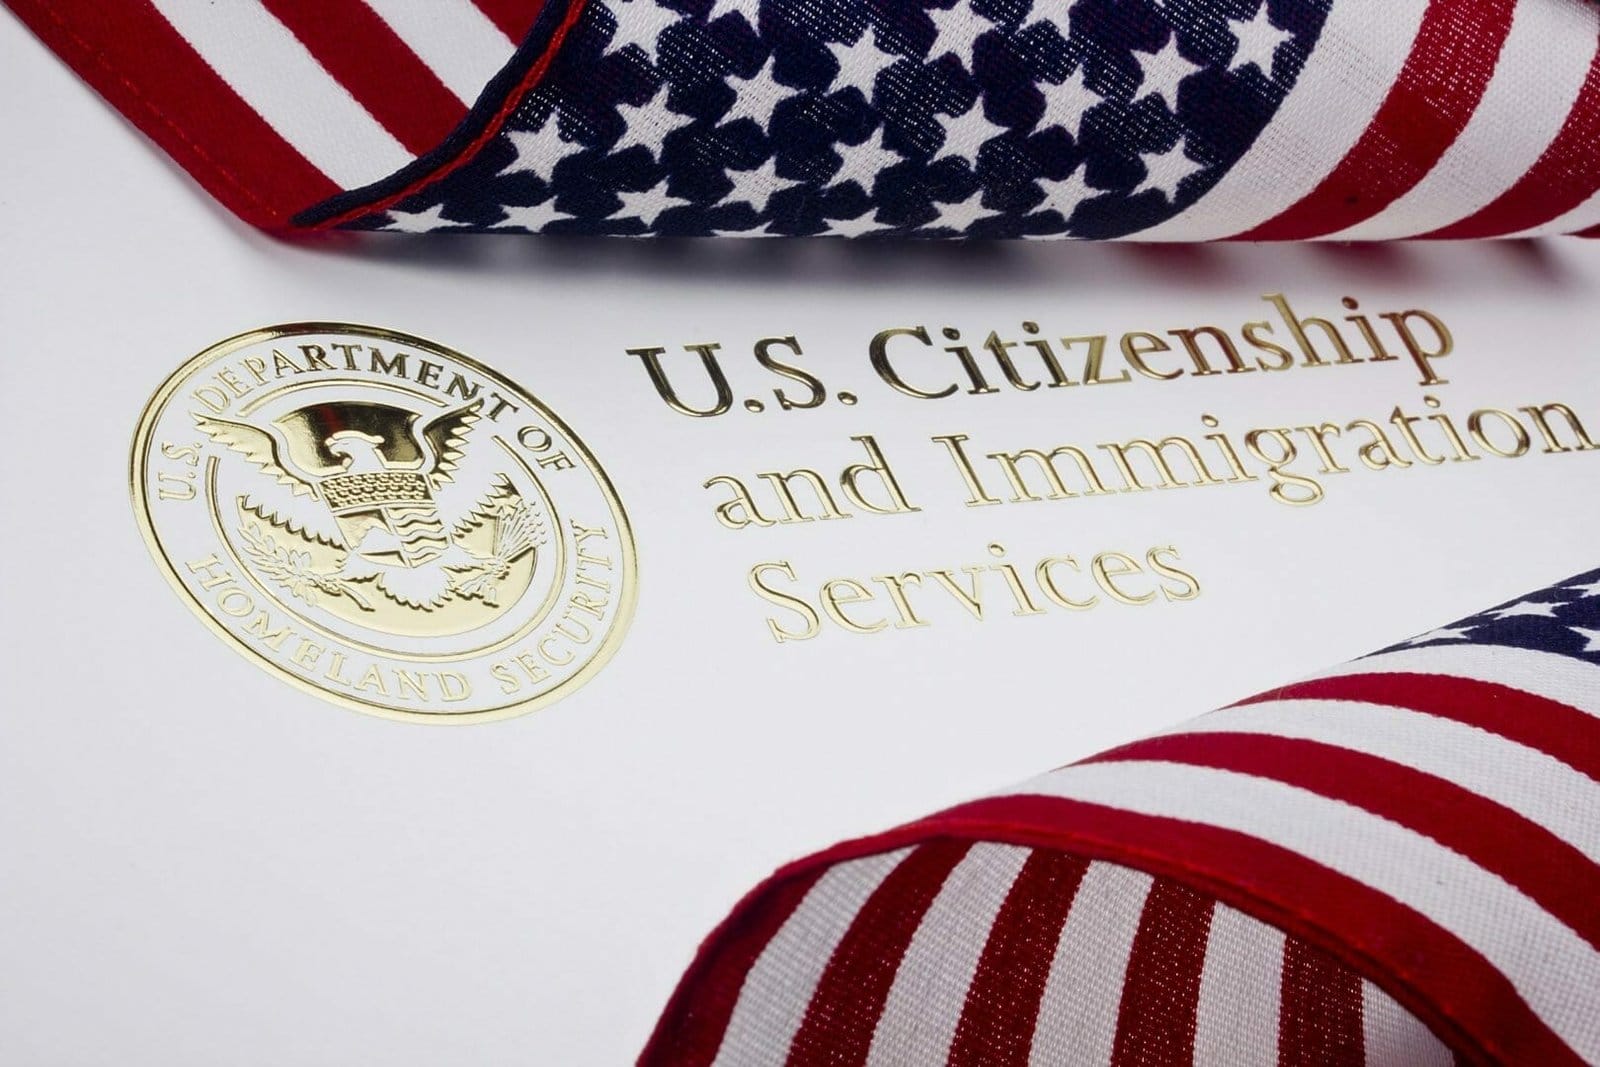 How to take the US Citizenship exam in another language